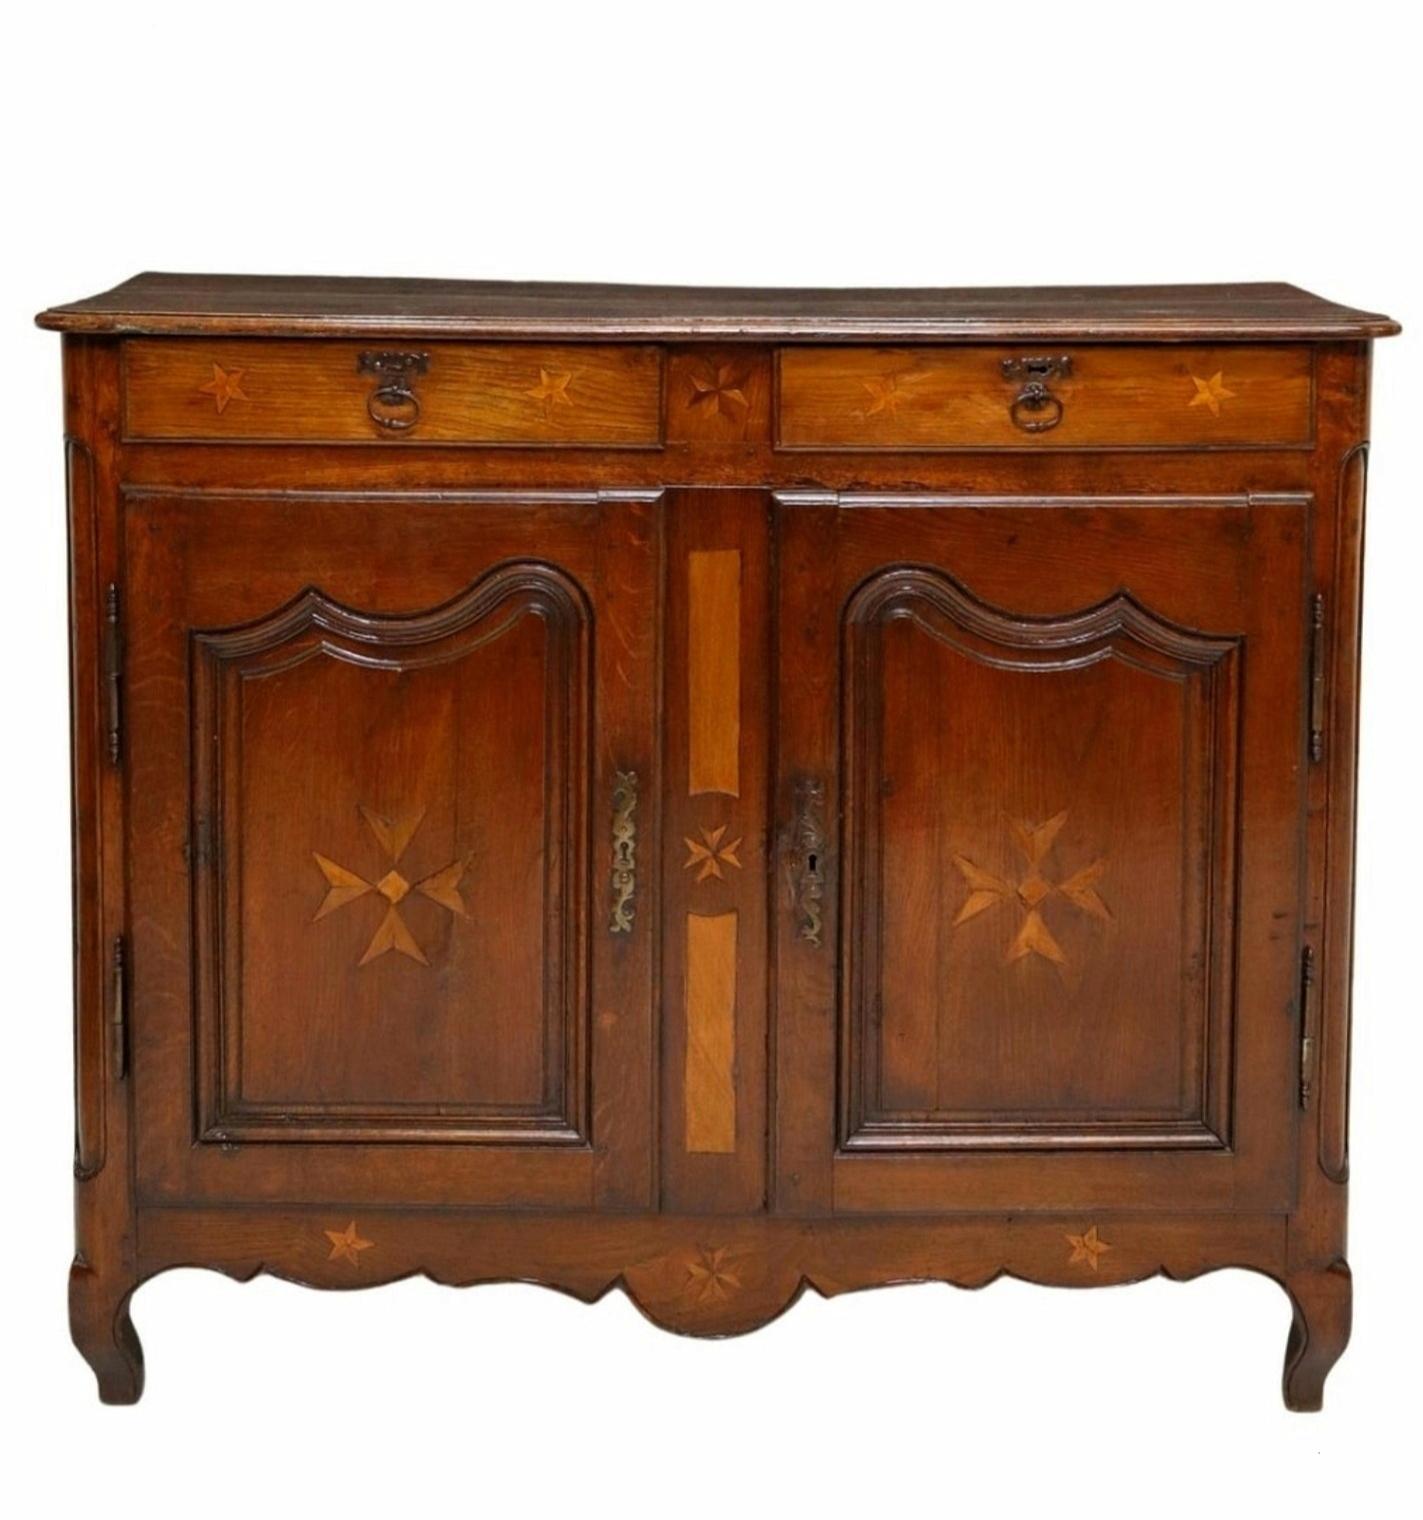 18th/19th Century French Provincial Oak Early Marquetry Sideboard  In Good Condition For Sale In Forney, TX